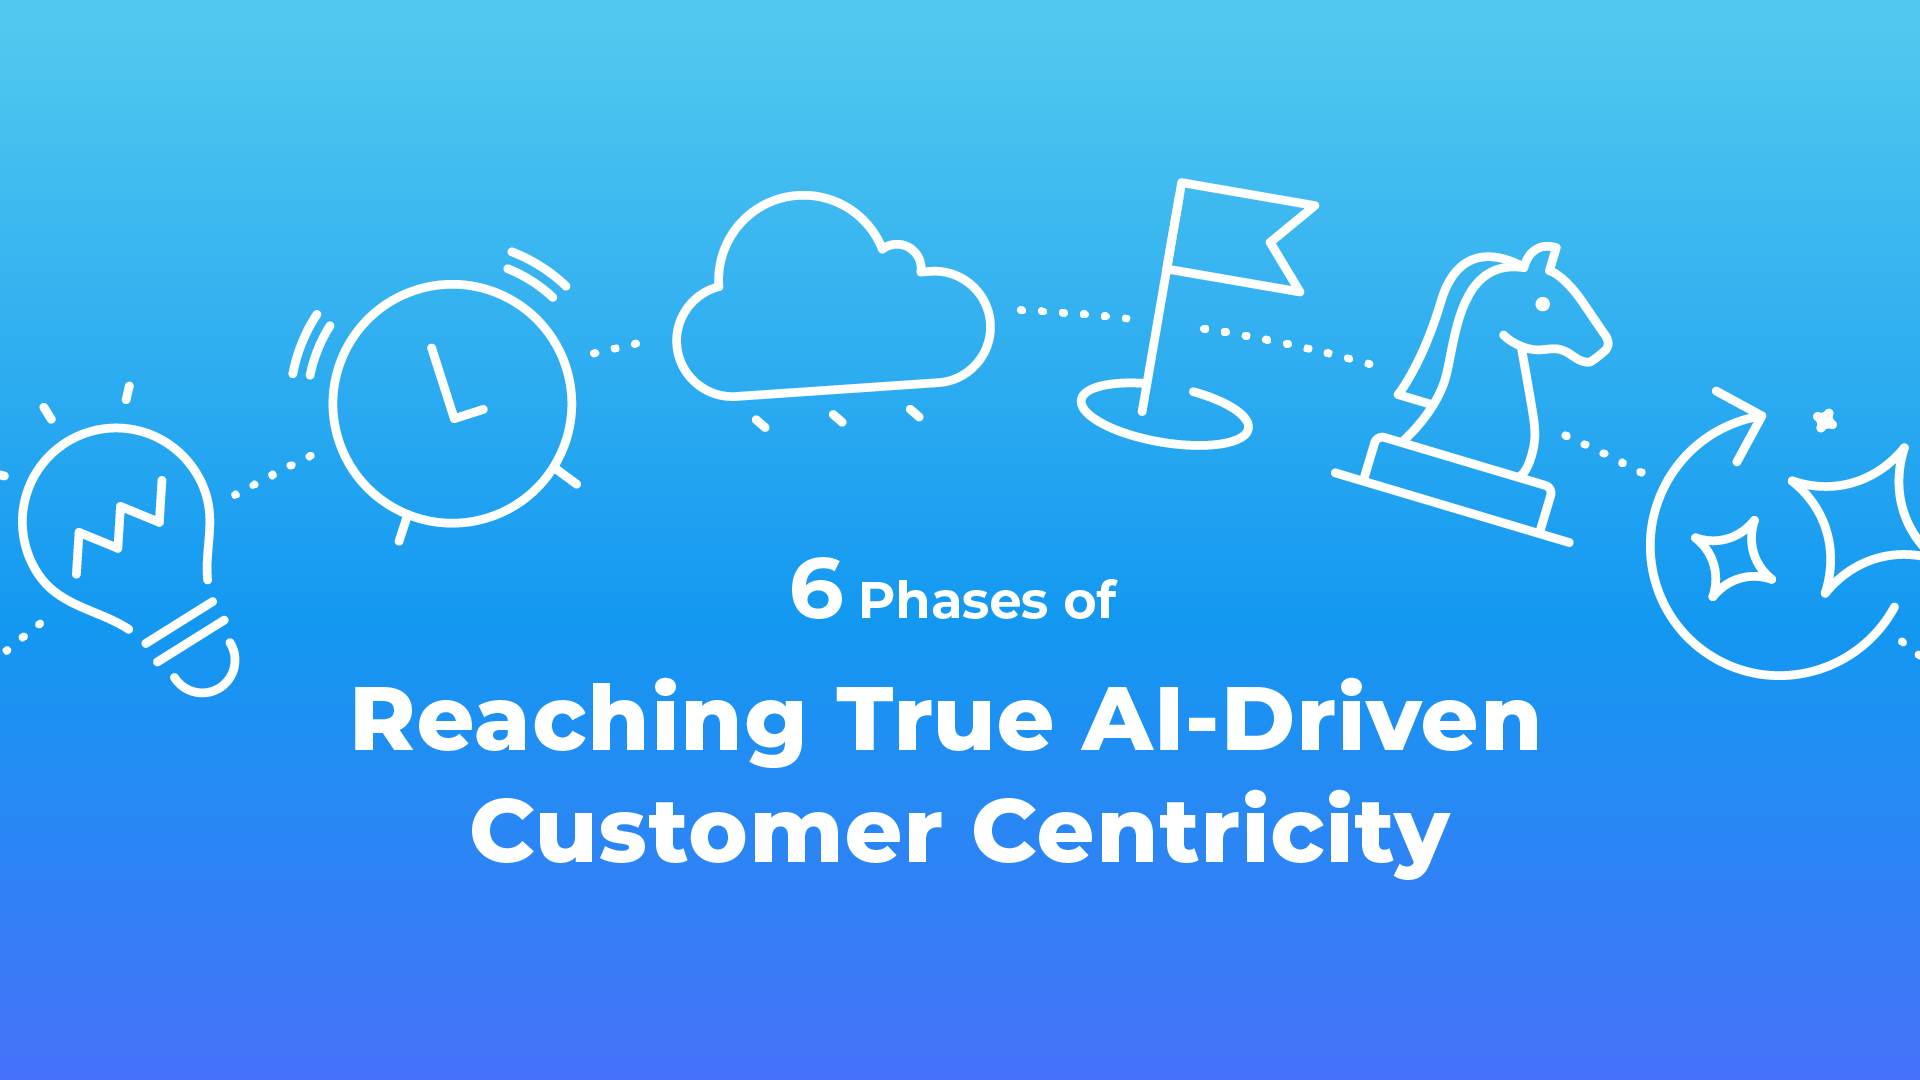 Six Phases of Reaching Customer Centricity With AI